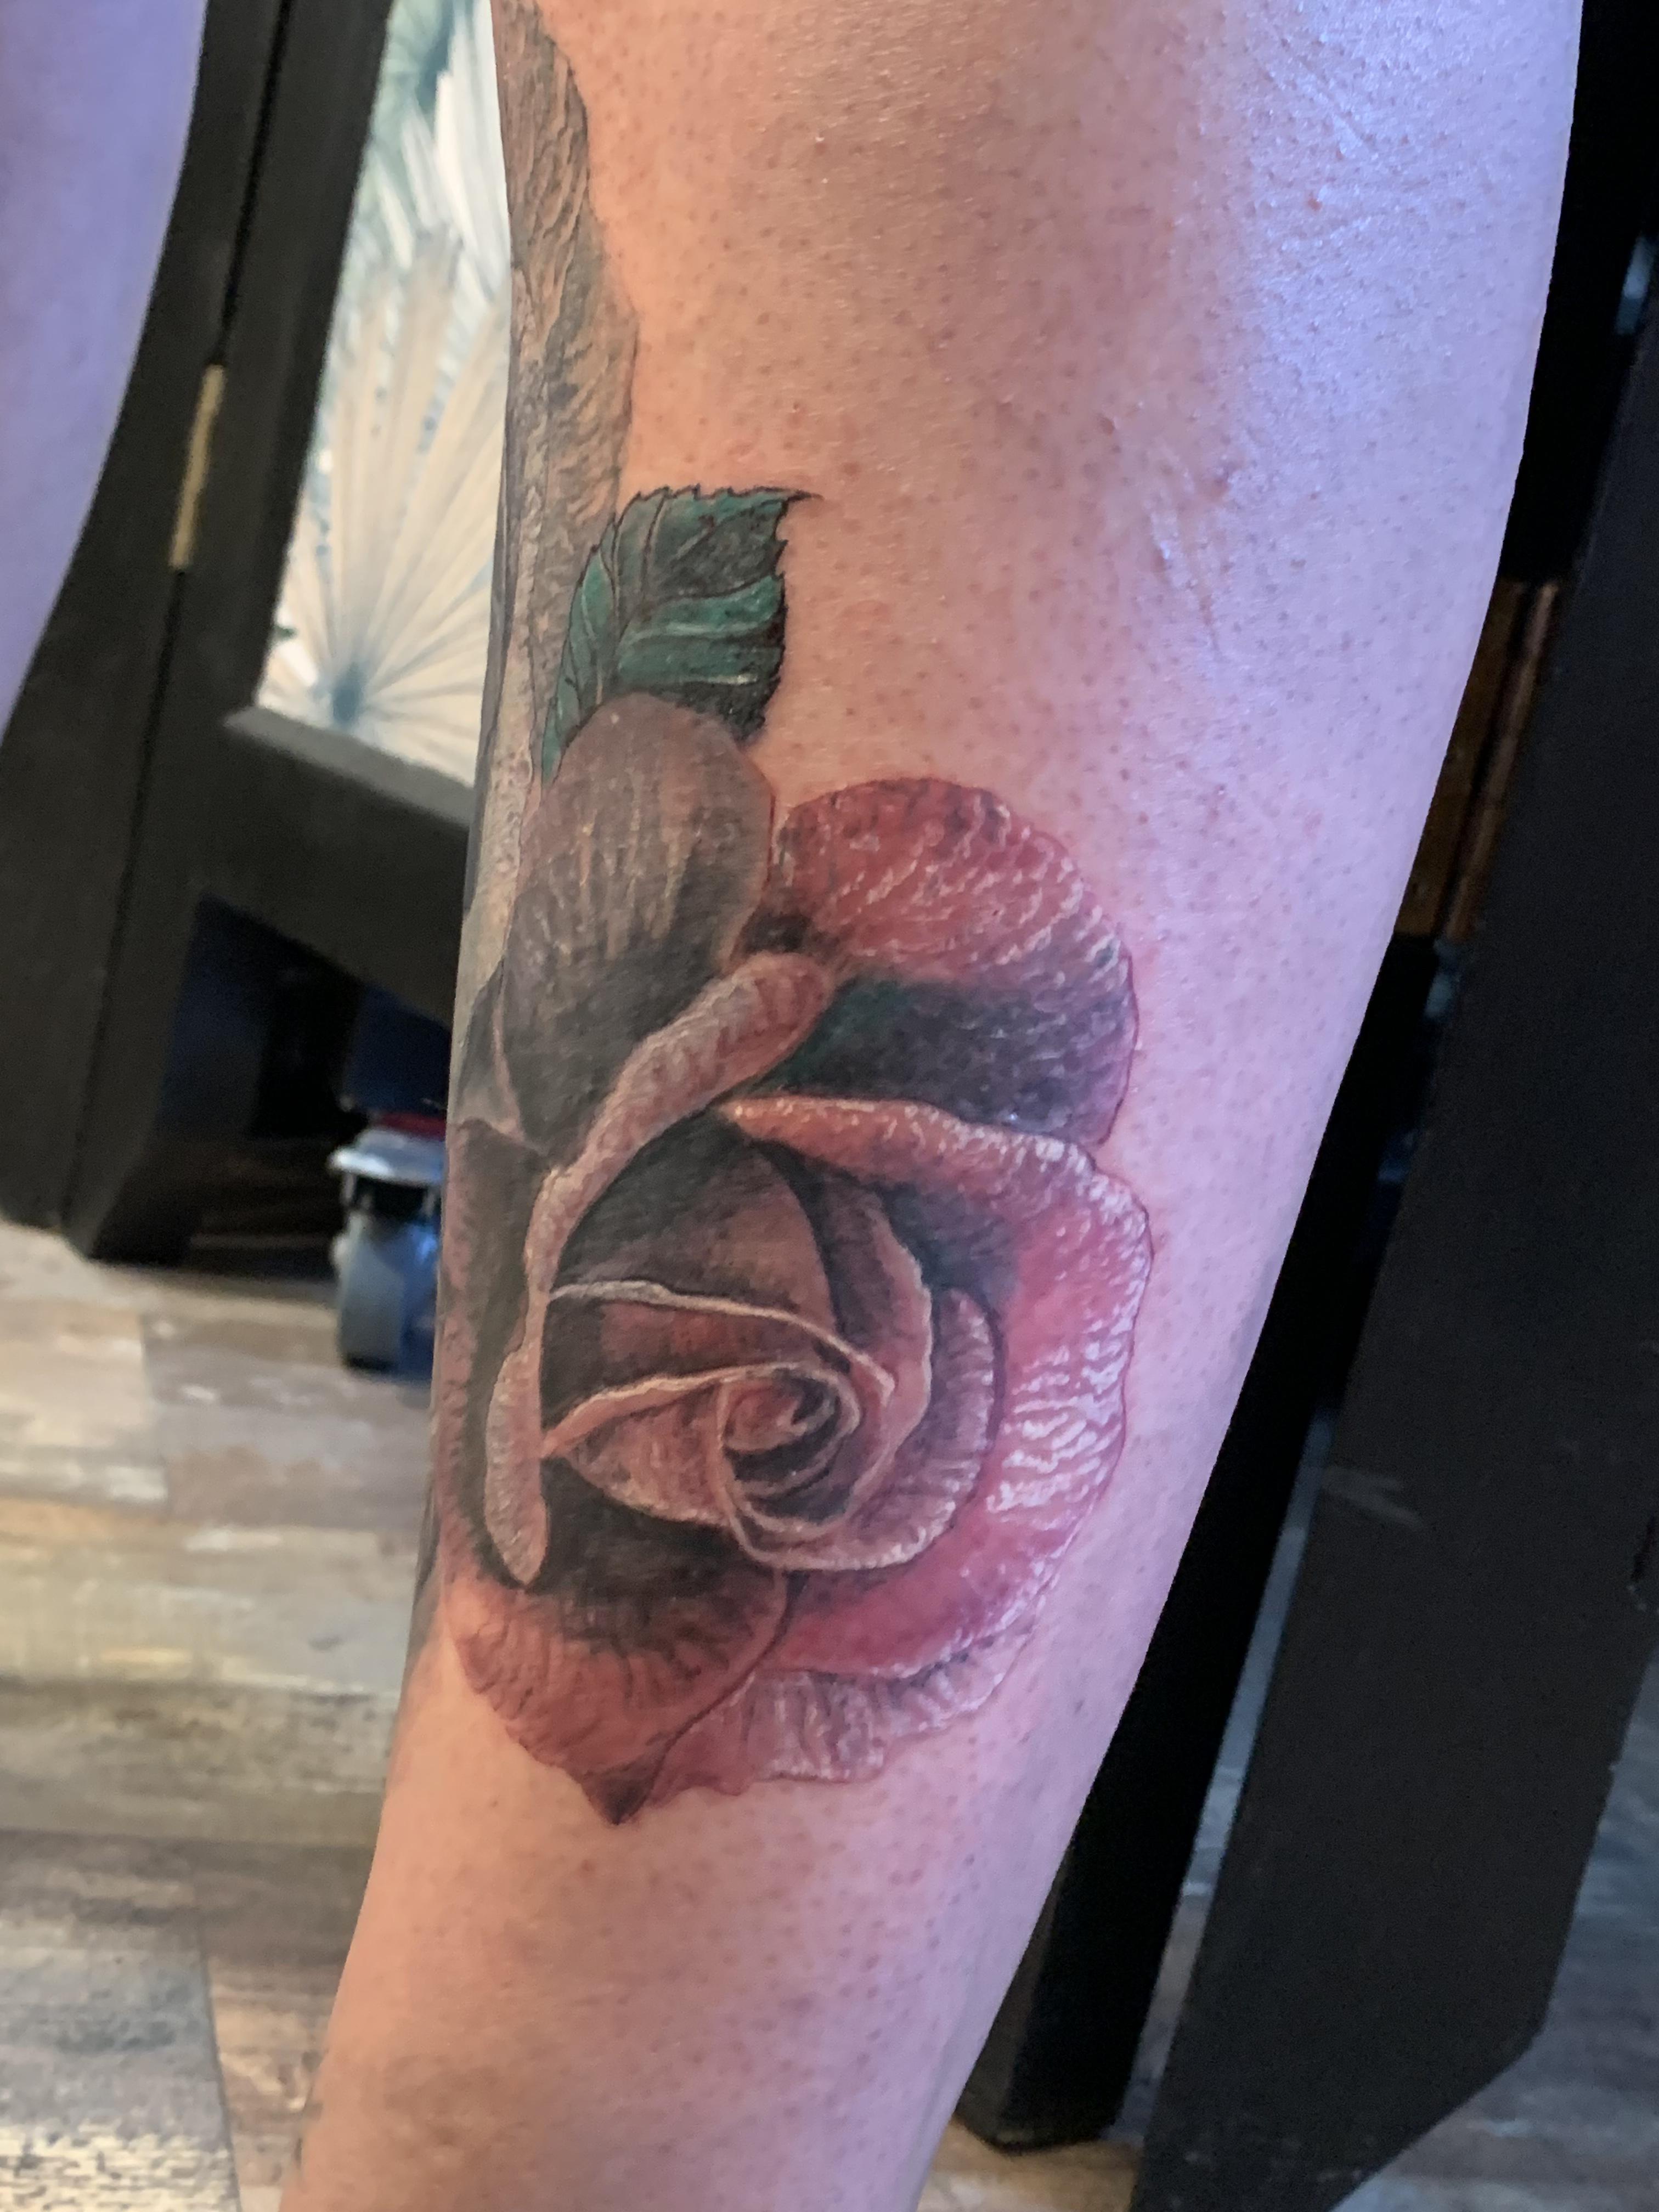 Tattoo cover / recouvrement roses